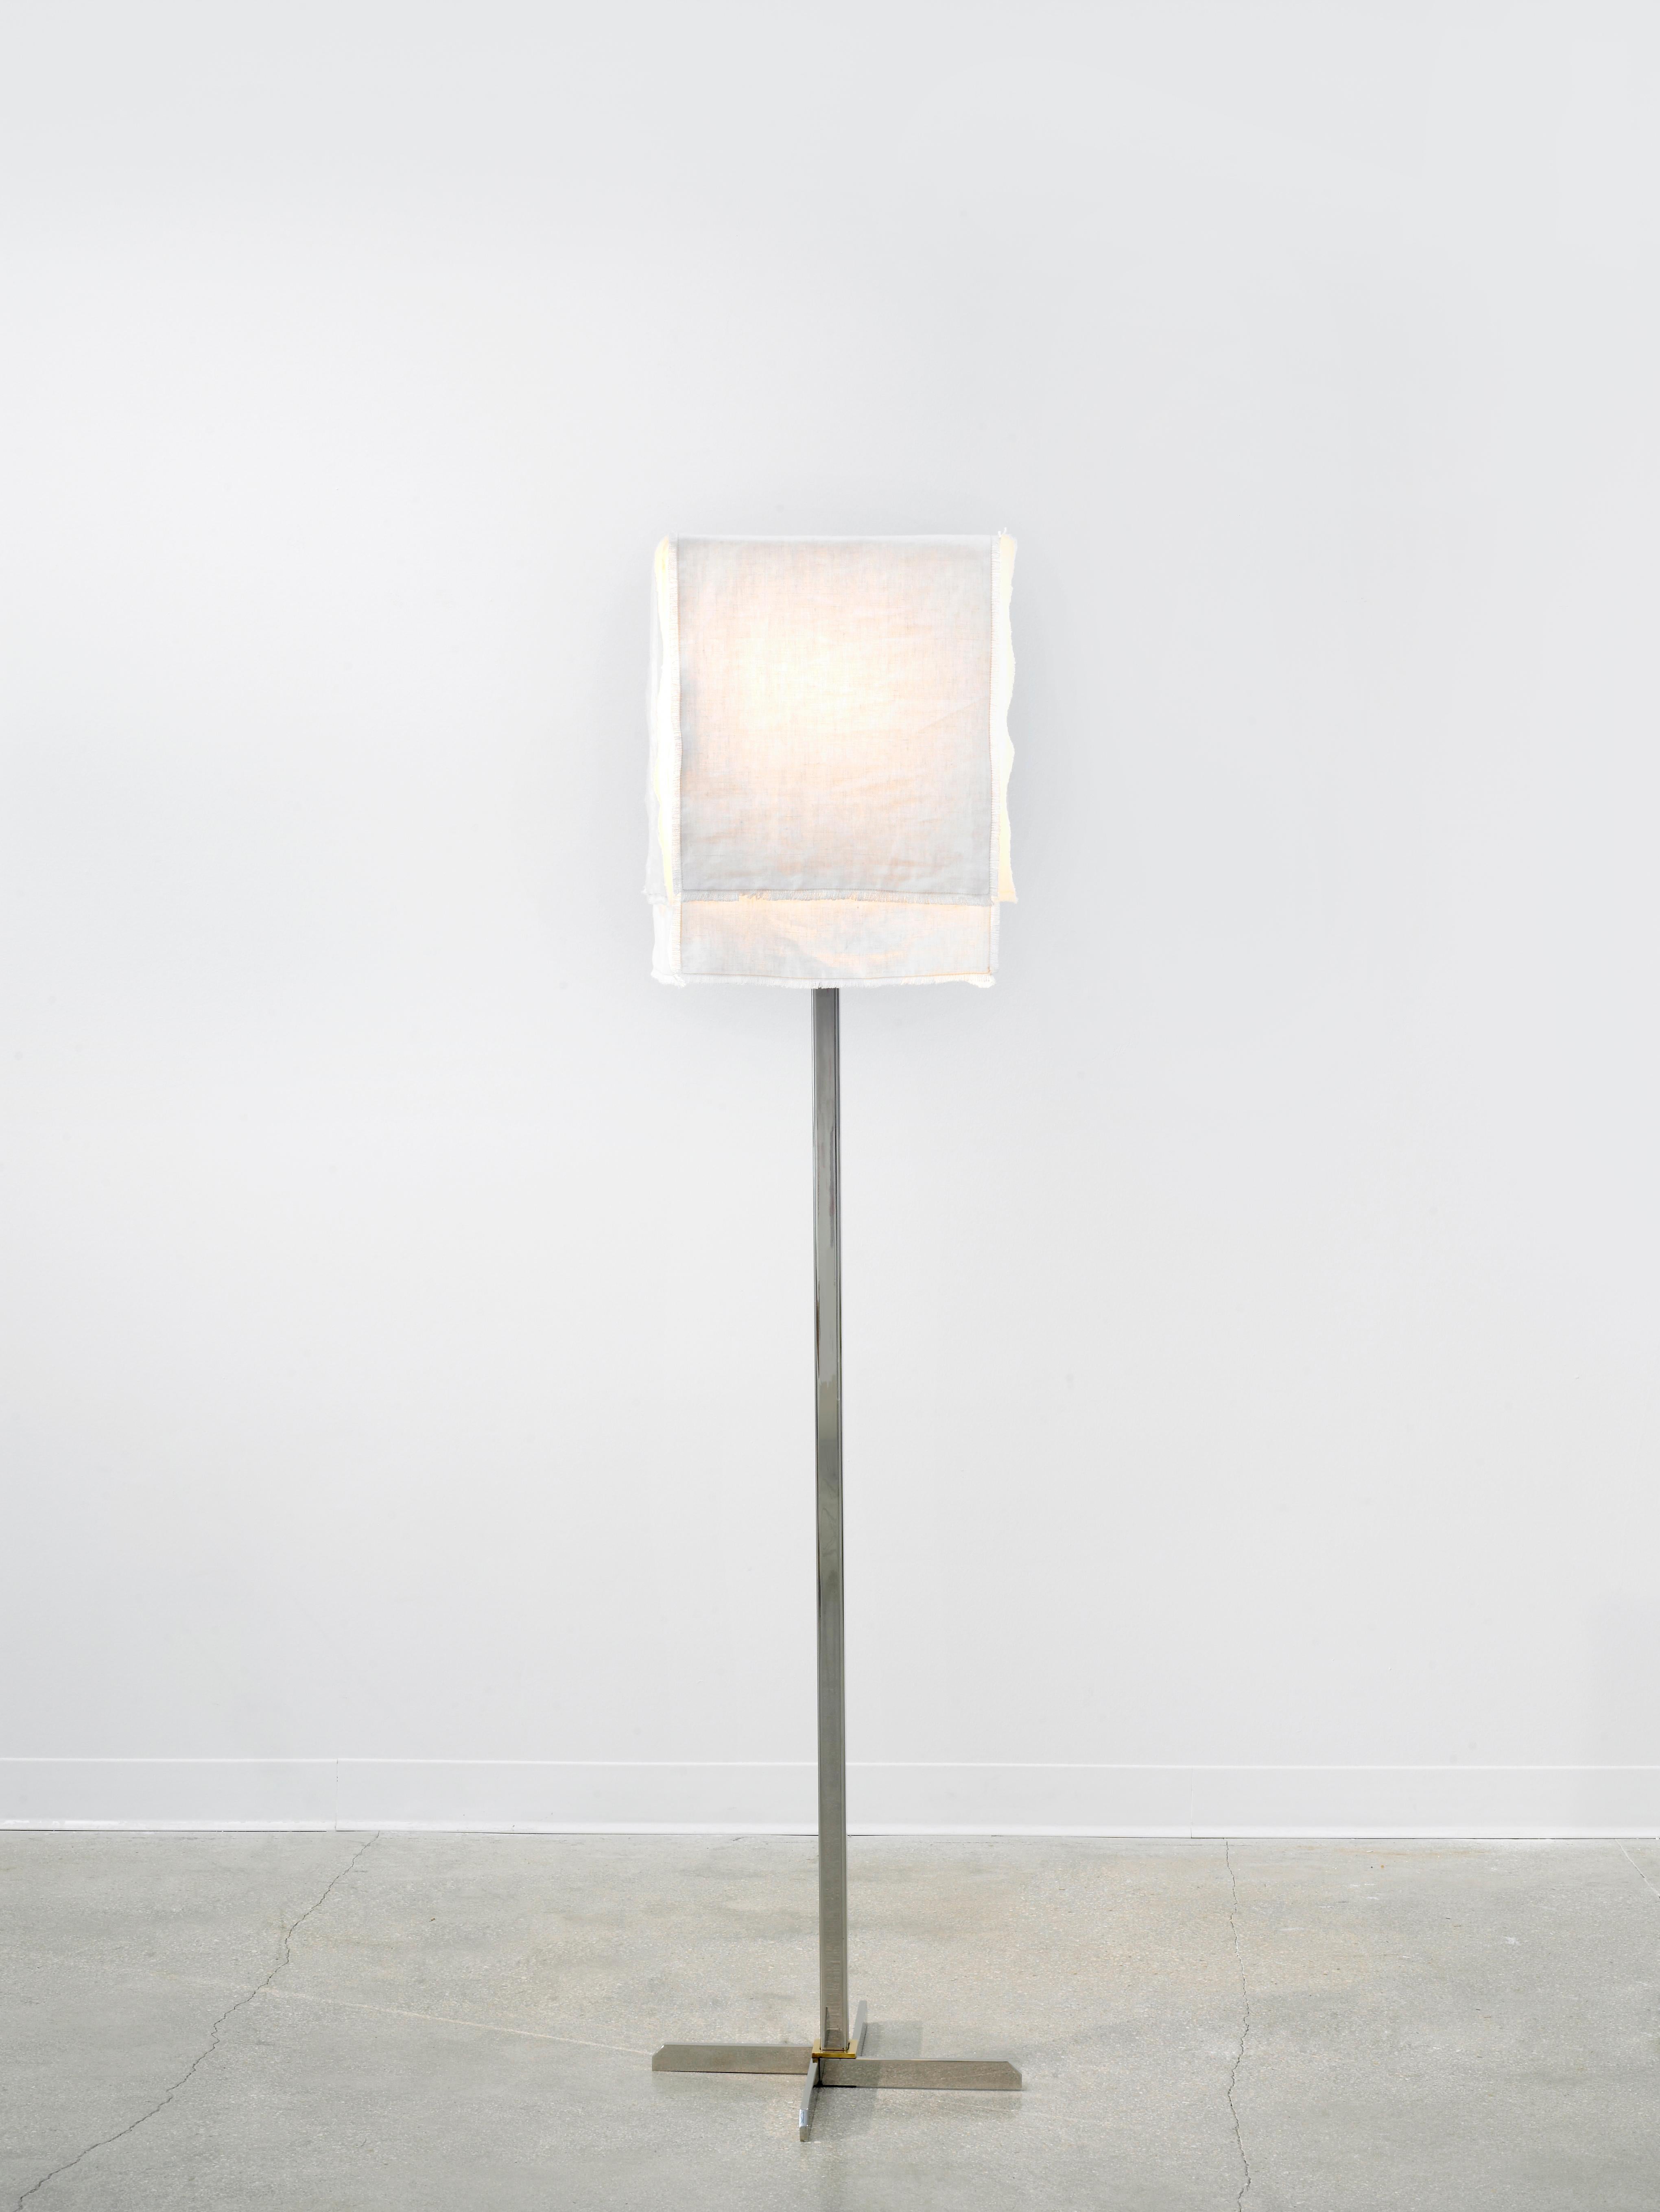 The Axis floor lamp is made of polished stainless steel, bronze and a custom four panel linen shade. The panels can be adjusted to create layered or even light filtration. The relaxed flow and texture of the shade compliments the structured metal